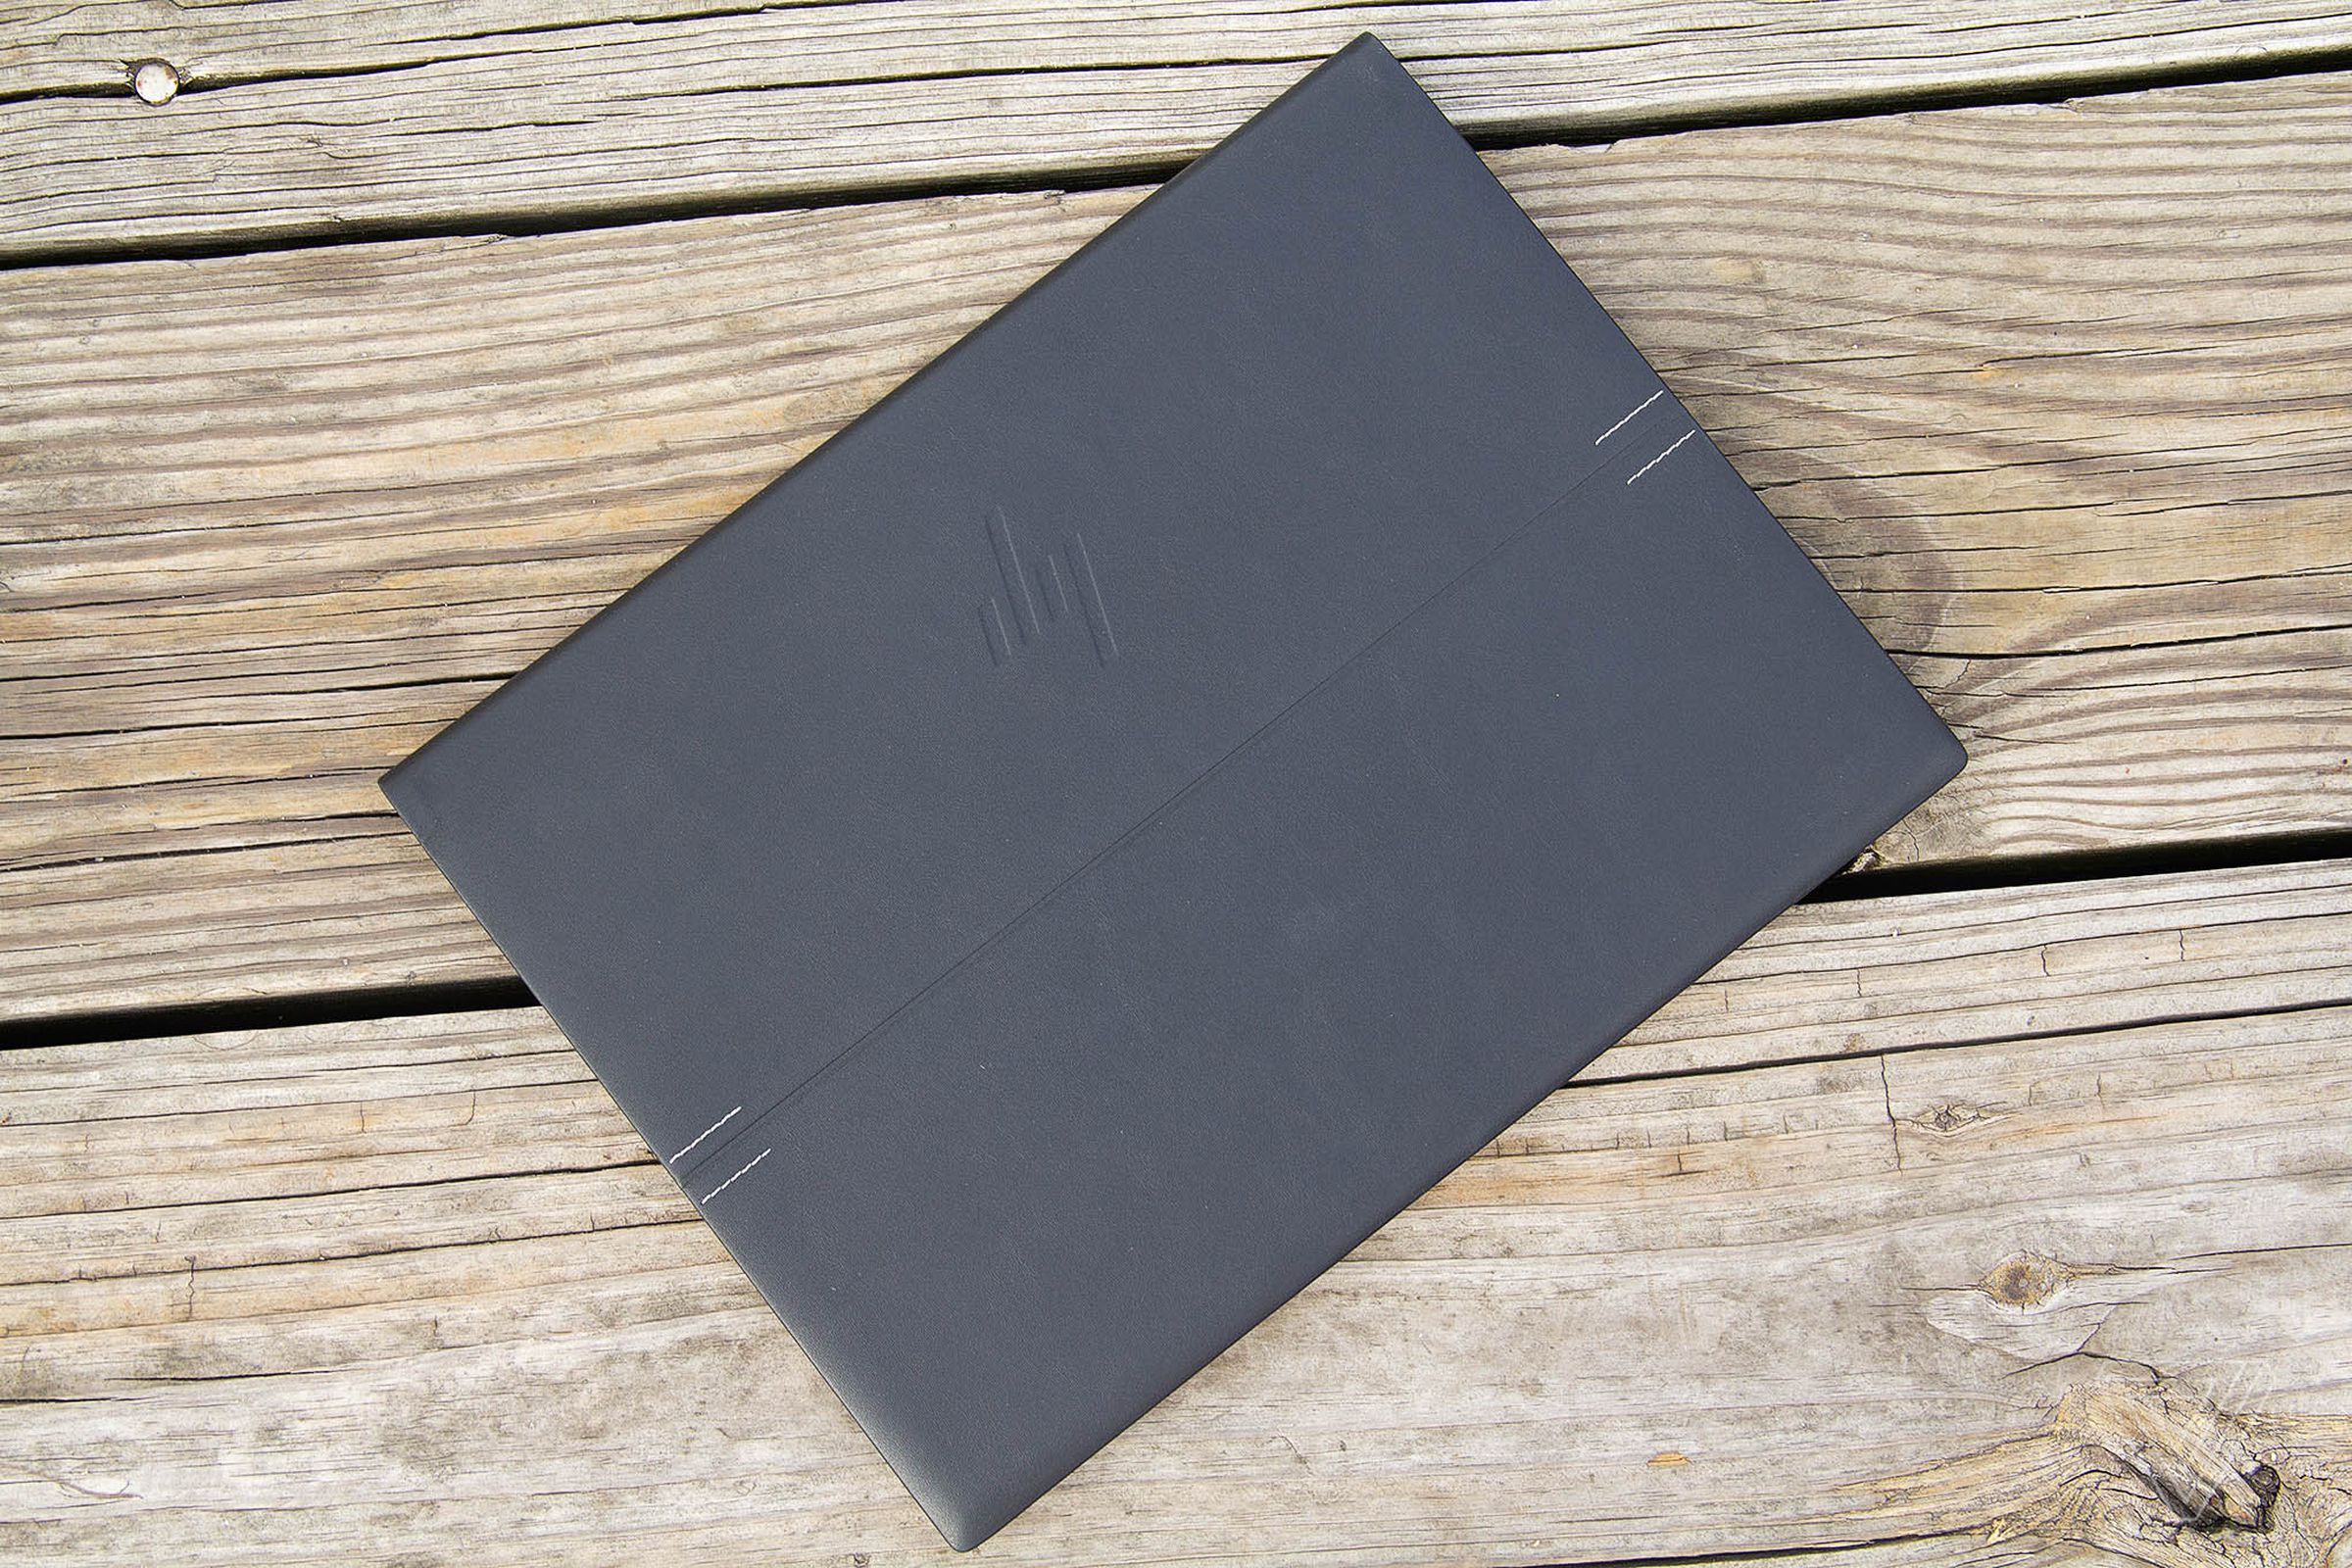 The HP Elite Folio closed on a wooden deck seen from above.